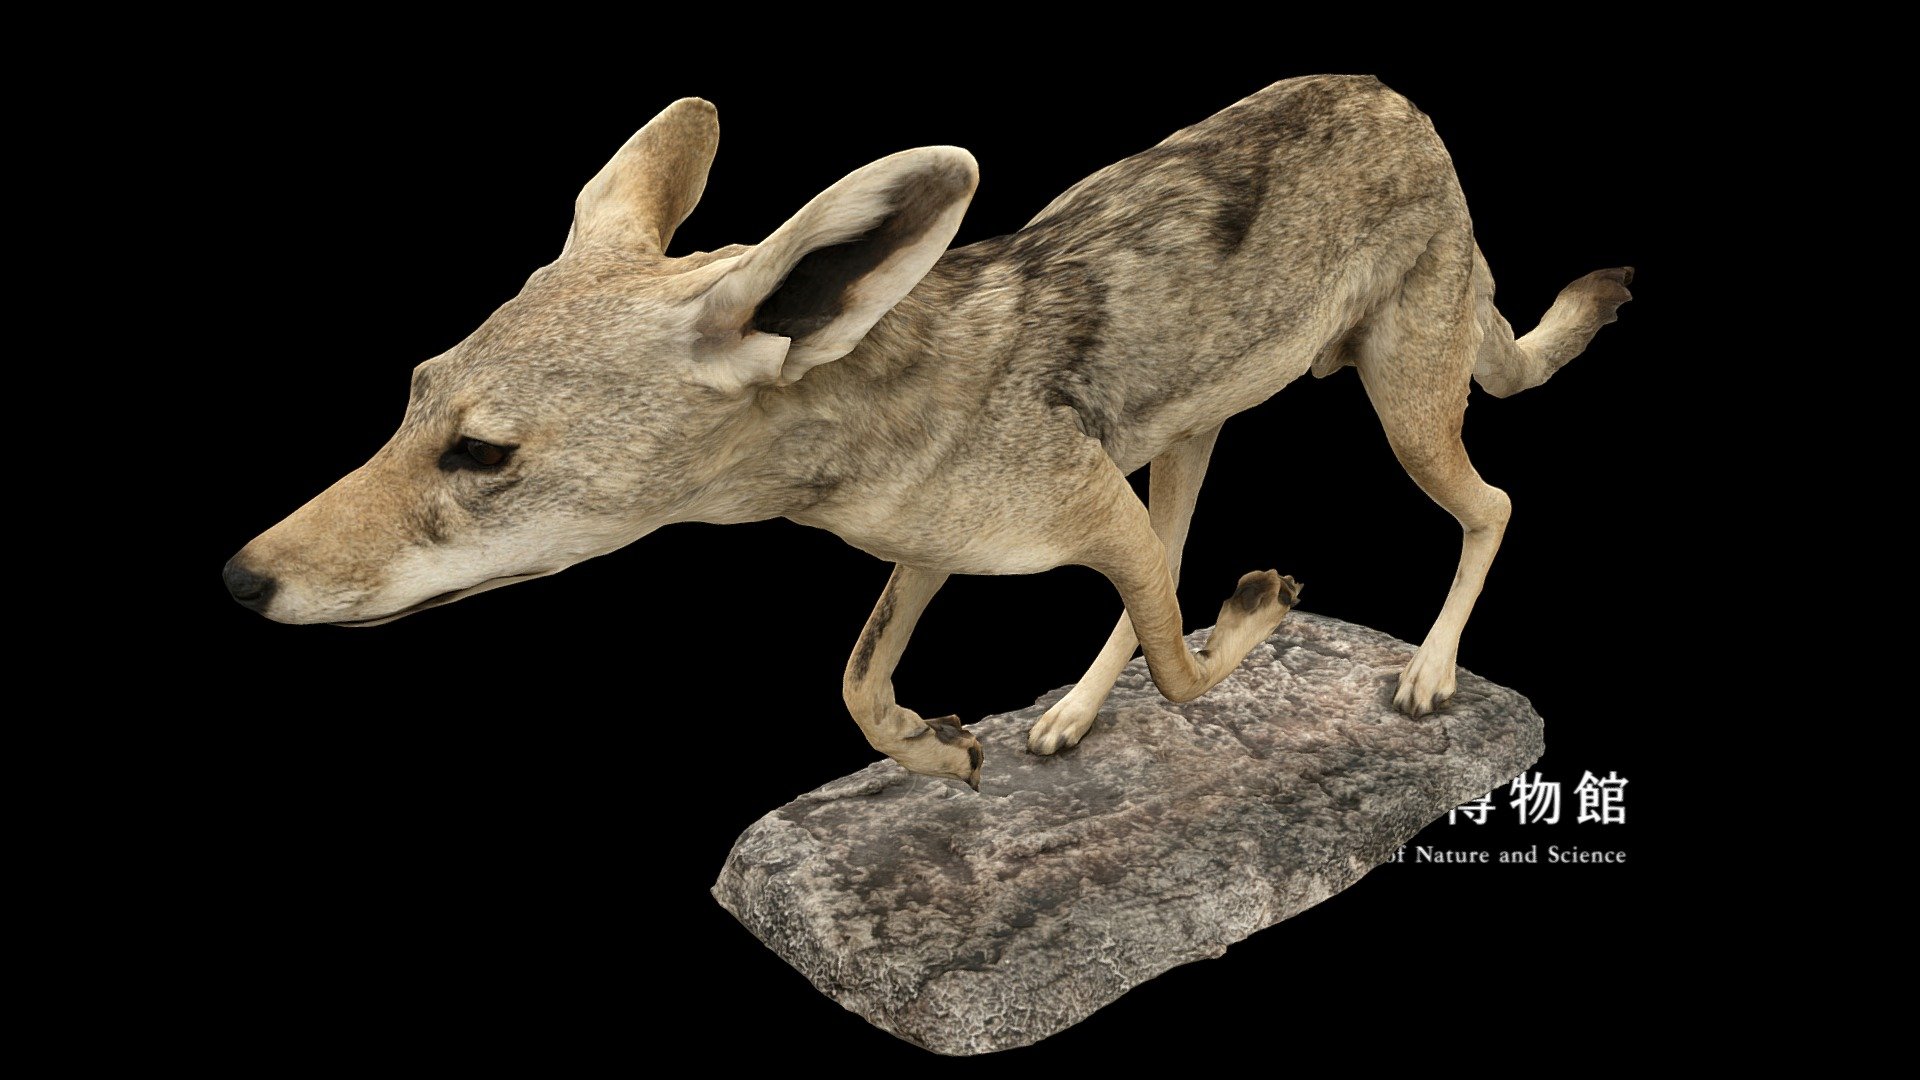 ■ About specimen

Scientific name : Canis mesomelas
Japanese vernacular name : セグロジャッカル
English vernacular name : Black-backed Jackal
Specimen type : Taxidermy specimen
Collection date : 1974-07
Collection place : Danakil, Chercher Mountains, ETHIOPIA
See also : record page on the &ldquo;Yoshimoto 3D